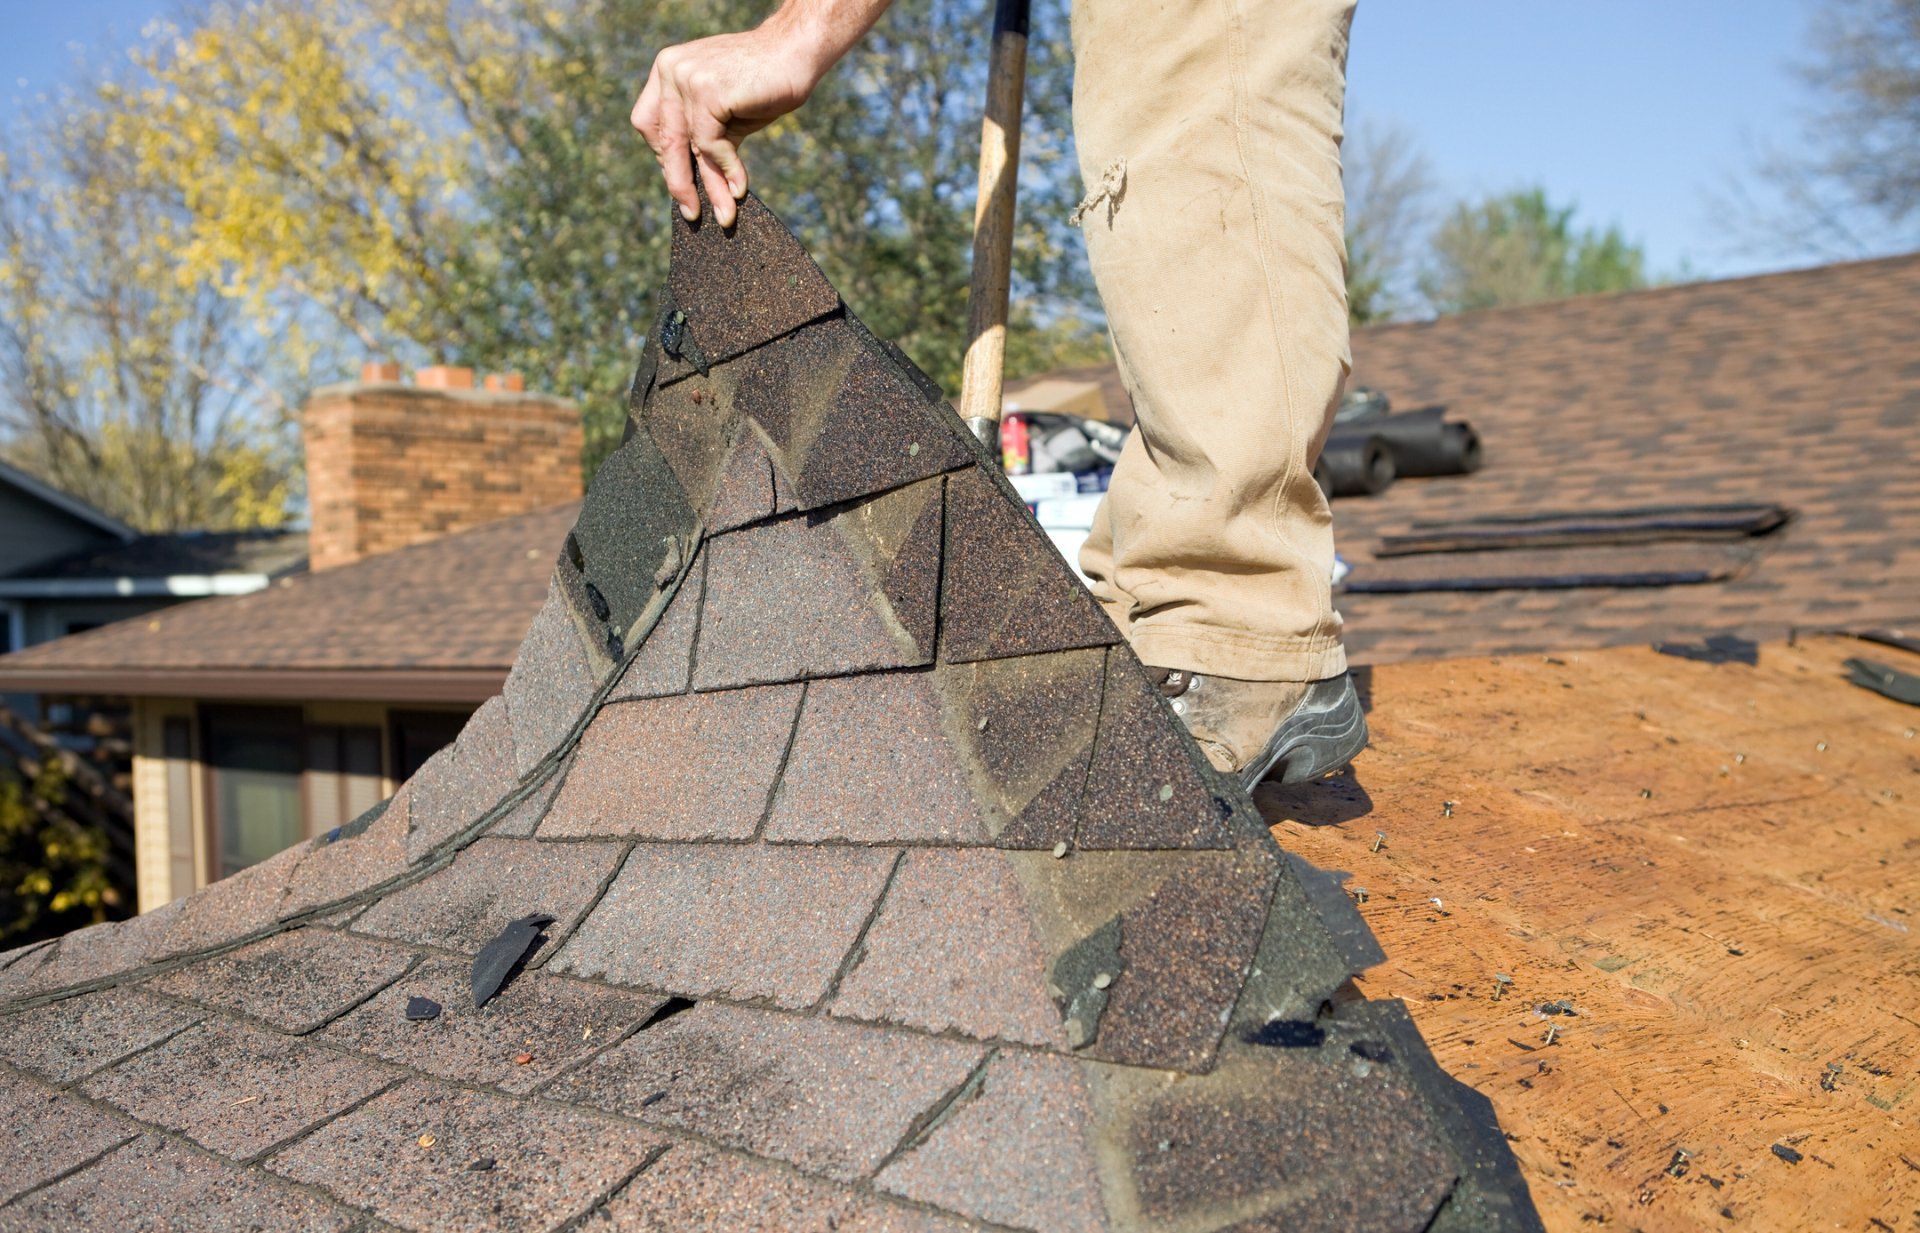 Removing Old Roof Shingles - St. Charles, MO - Clayton Restoration